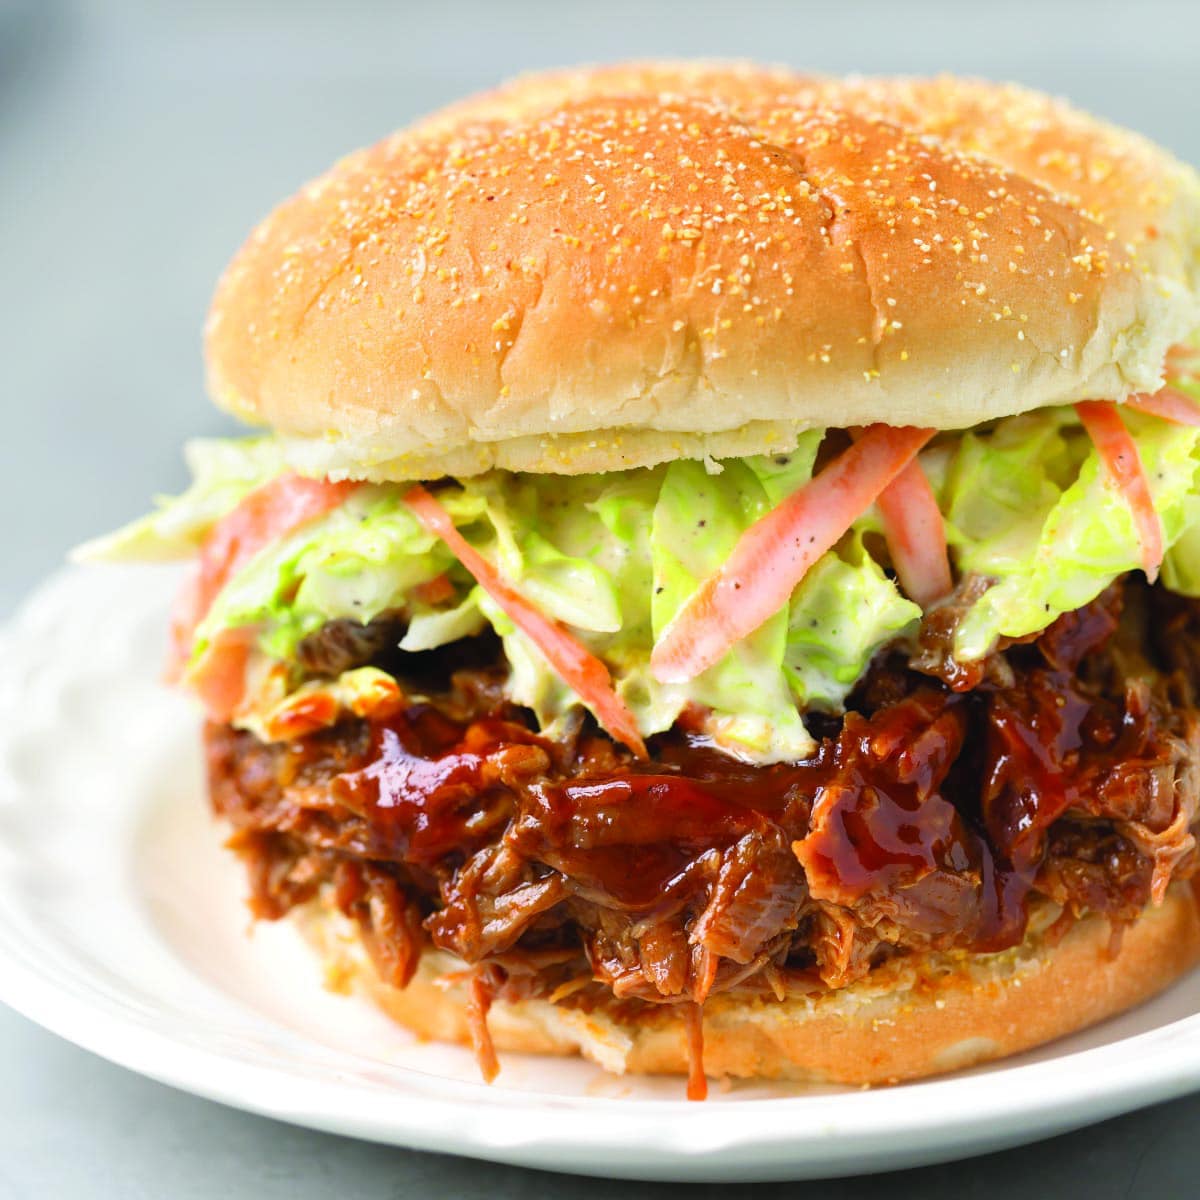 https://www.simplyhappyfoodie.com/wp-content/uploads/2018/01/instant-pot-pulled-pork-featured.jpg